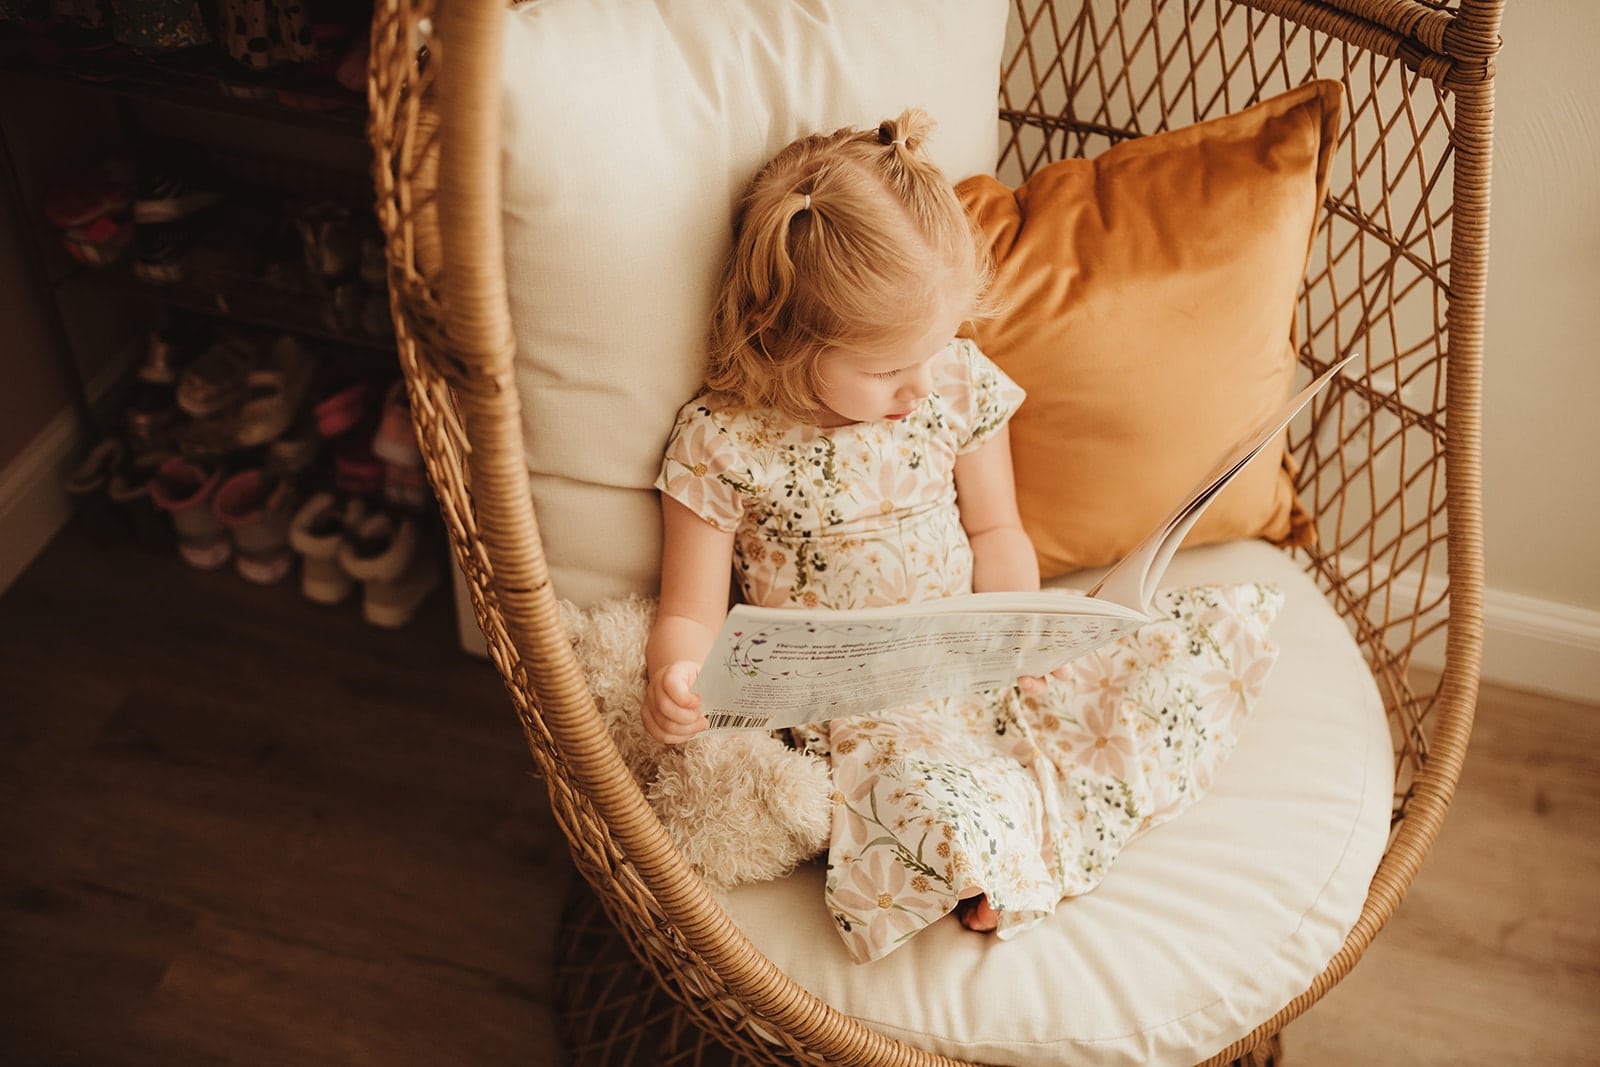 A little girl wearing a floral dress is reading a book while sitting in a boho wicker chair.